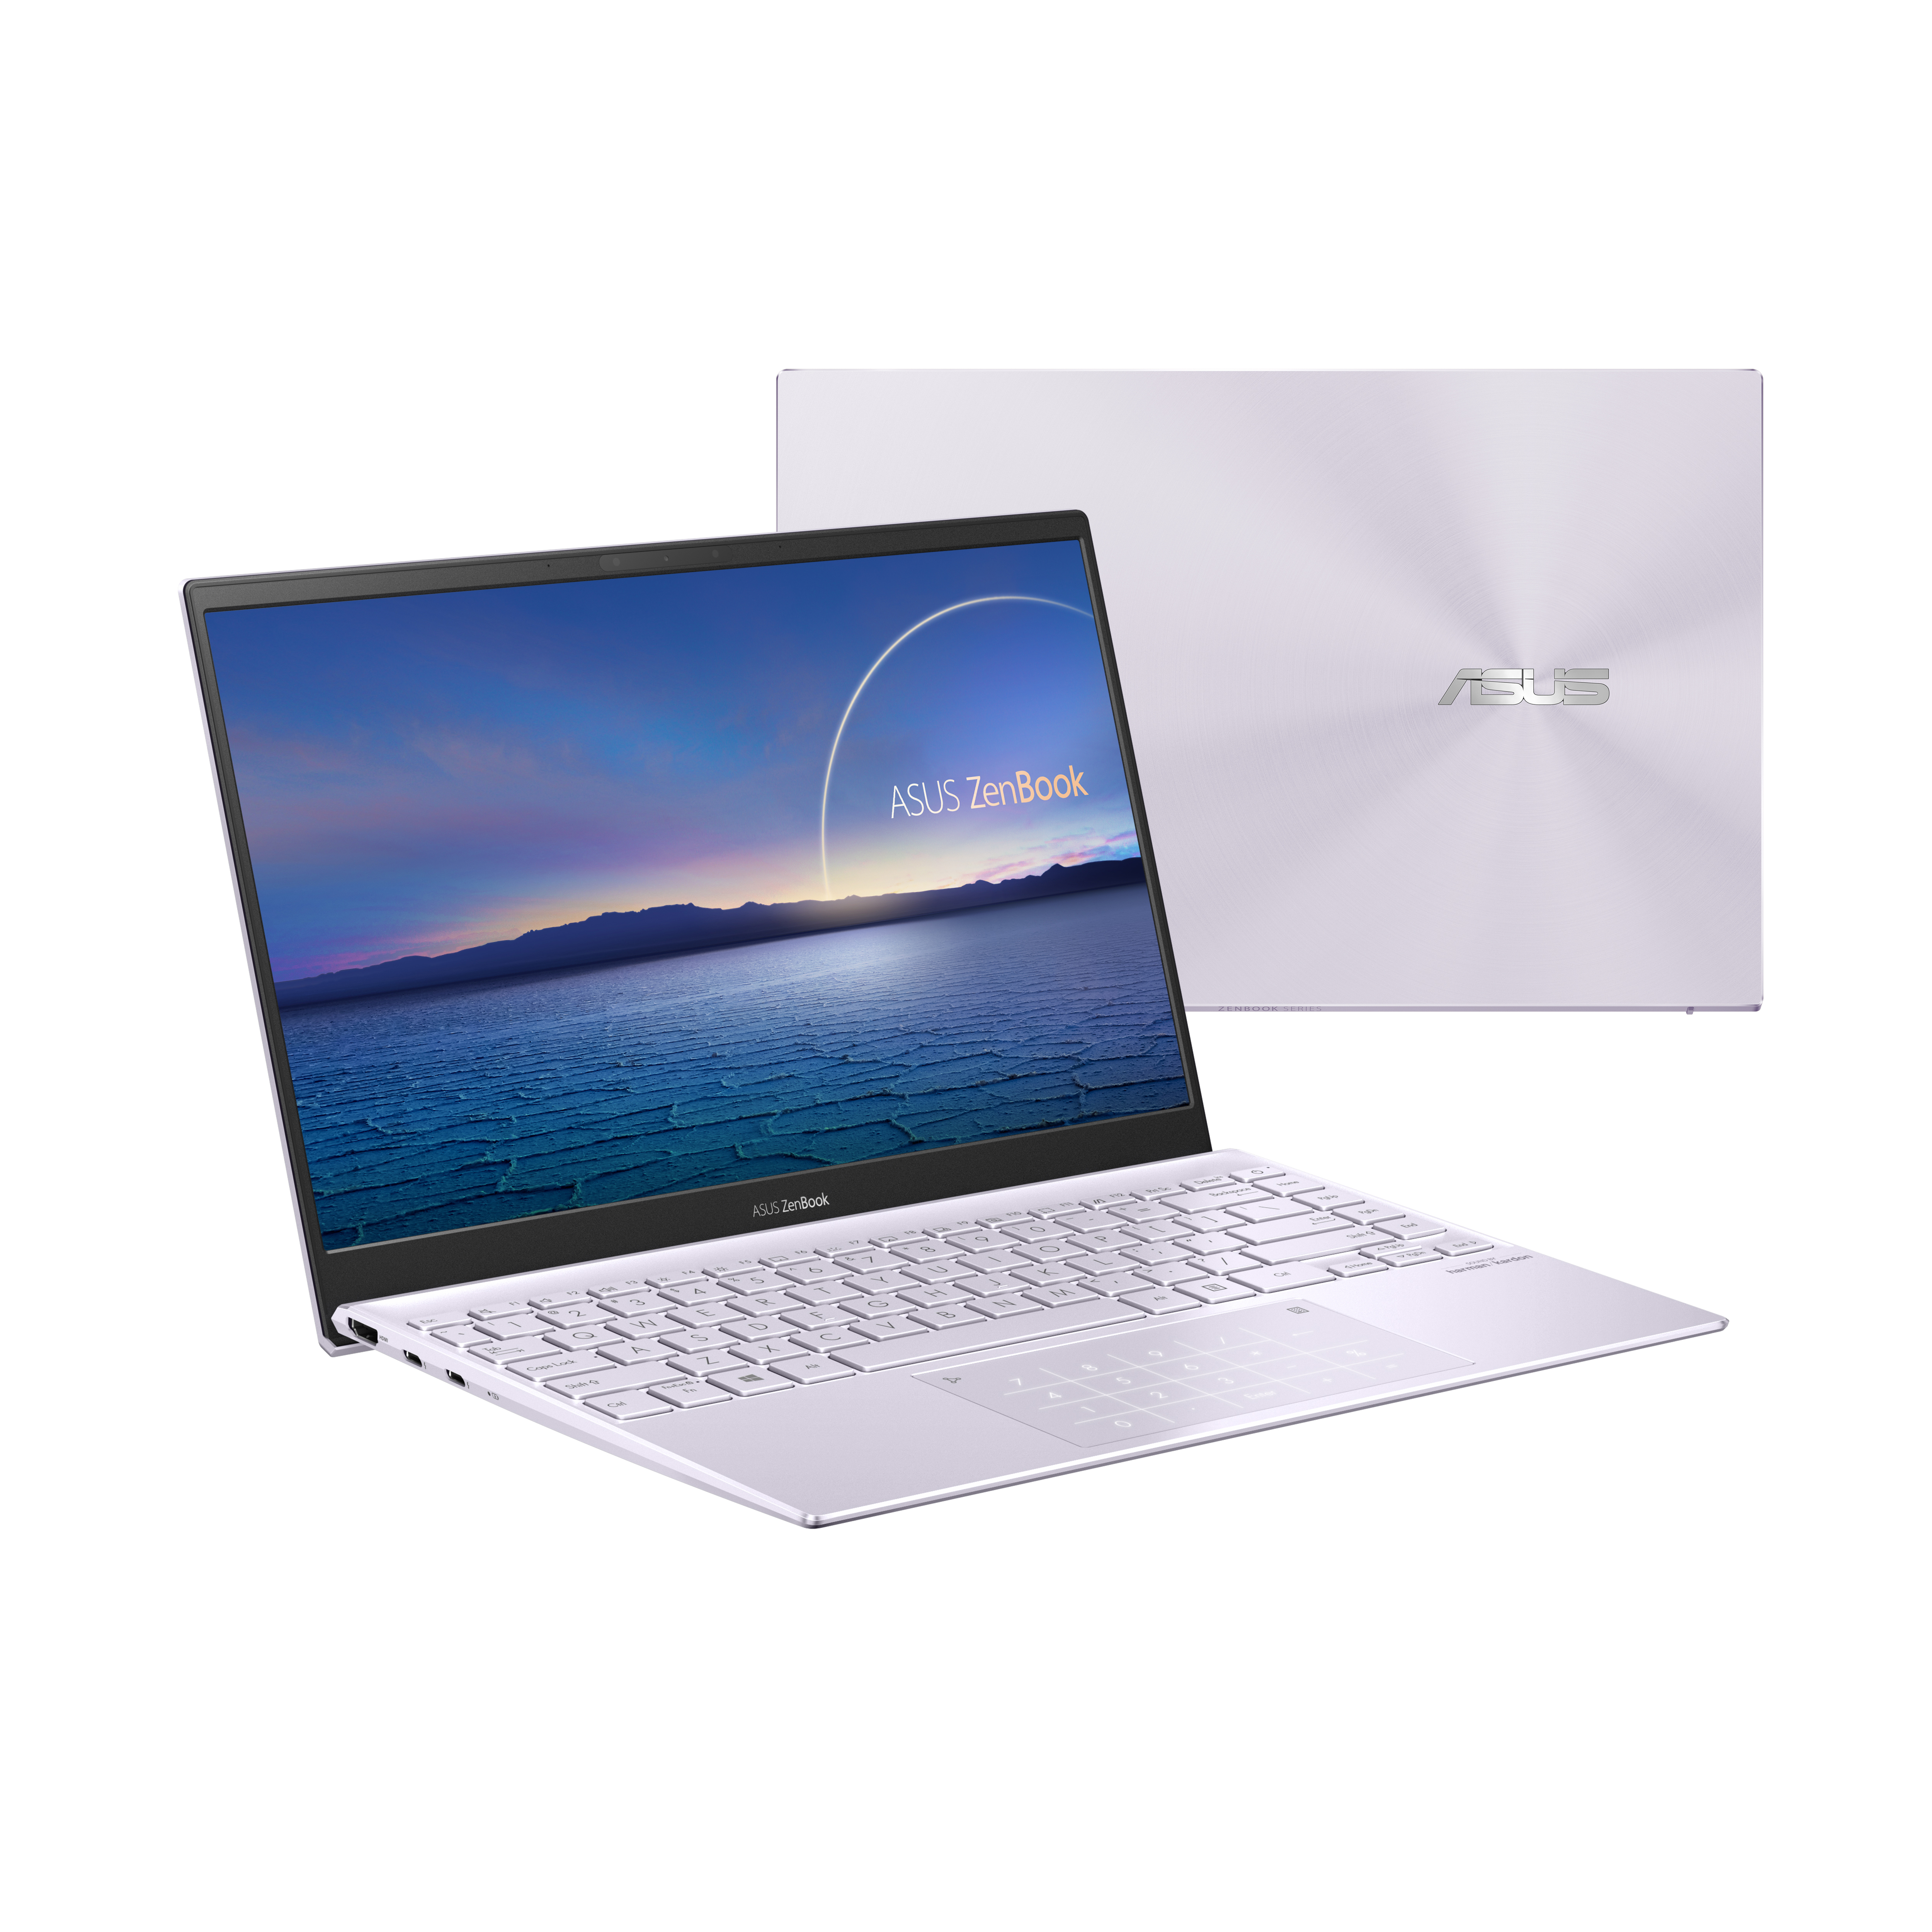 Asus zenbook 13 ux325ea. ASUS ZENBOOK 13 ux325ja. ASUS ZENBOOK 14 ux425ja. ASUS ZENBOOK um425ia-am025. ASUS ZENBOOK 14 ux435eg-a5038t.